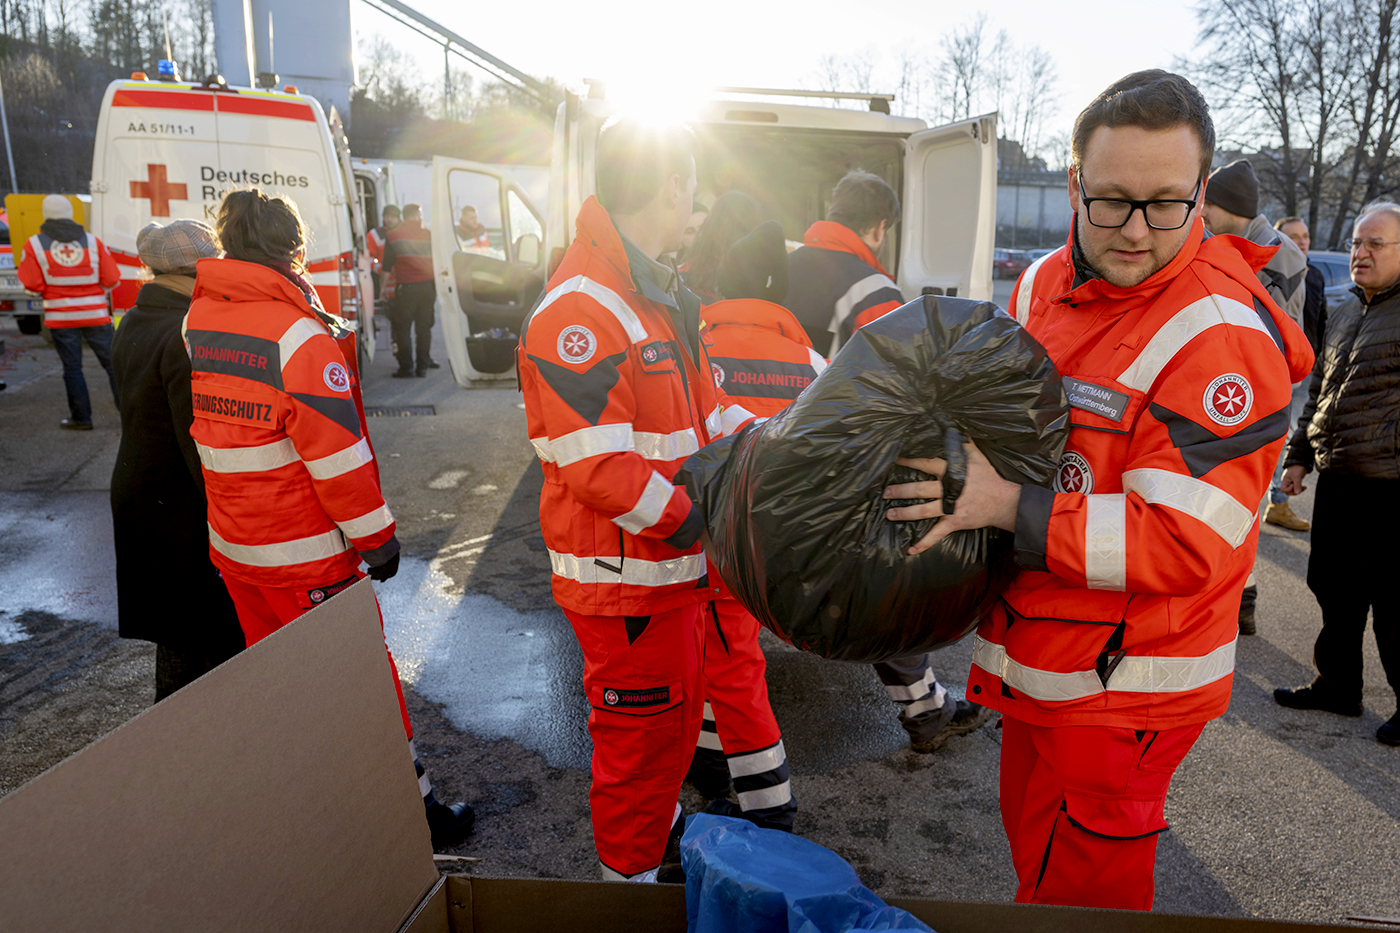 Coming to the rescue: American Red Cross helps Turkey in quake aftermath